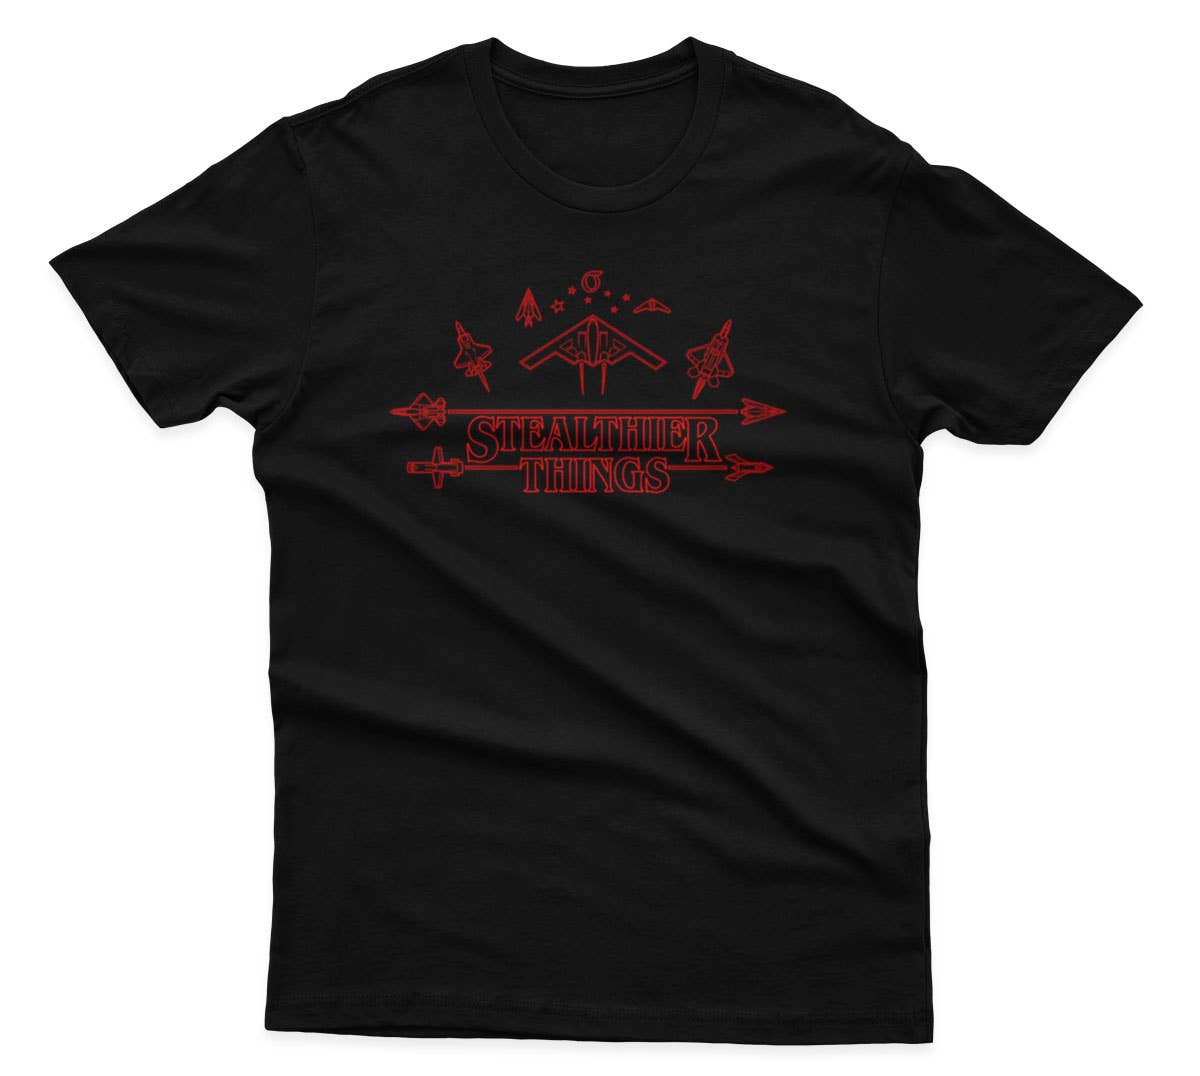 Show Your Love For &#8216;Stealthier Things&#8217; And Help Gold Star Families By Grabbing This T-Shirt